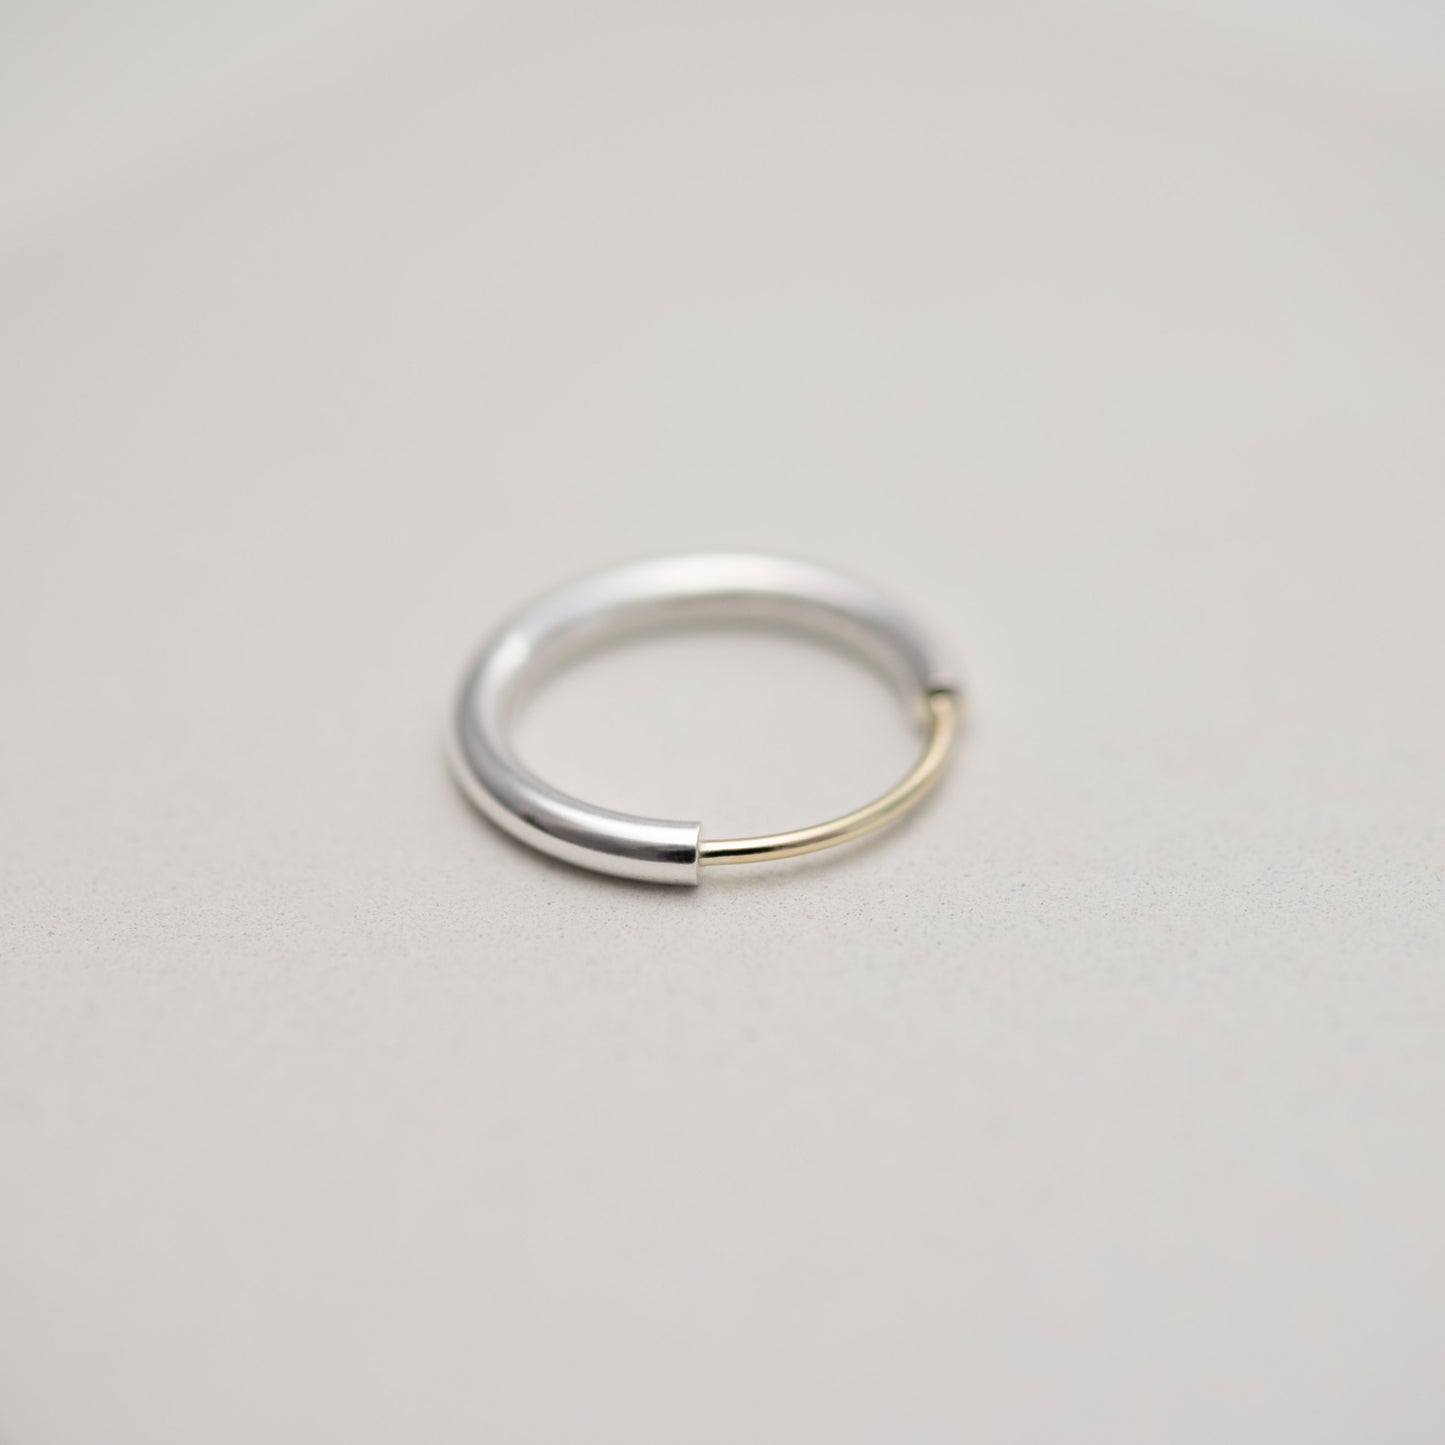 Arch silver and gold ring by AgJc